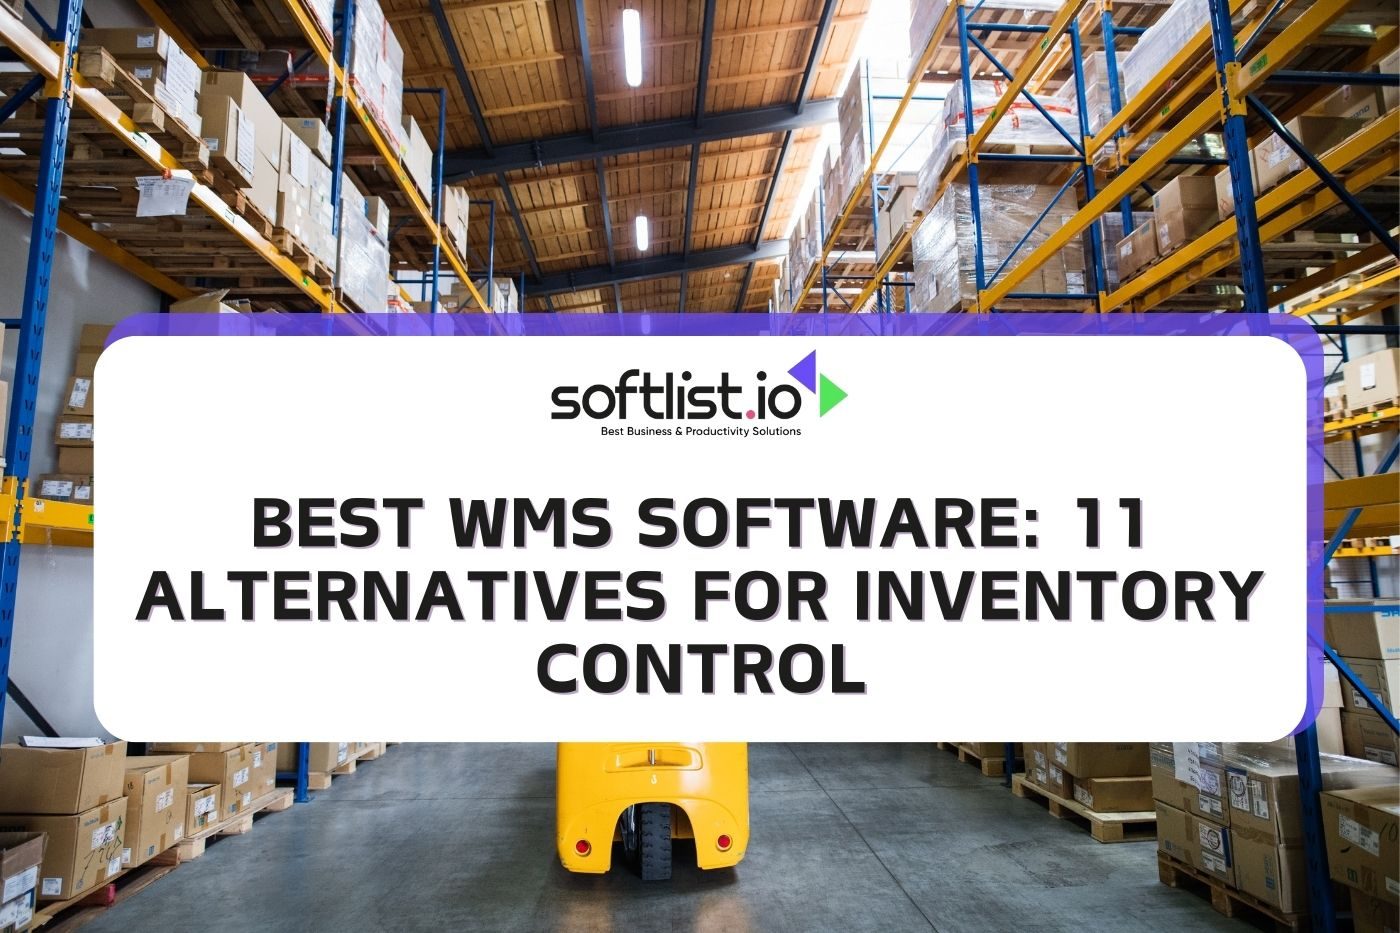 Best WMS Software 11 Alternatives for Inventory Control